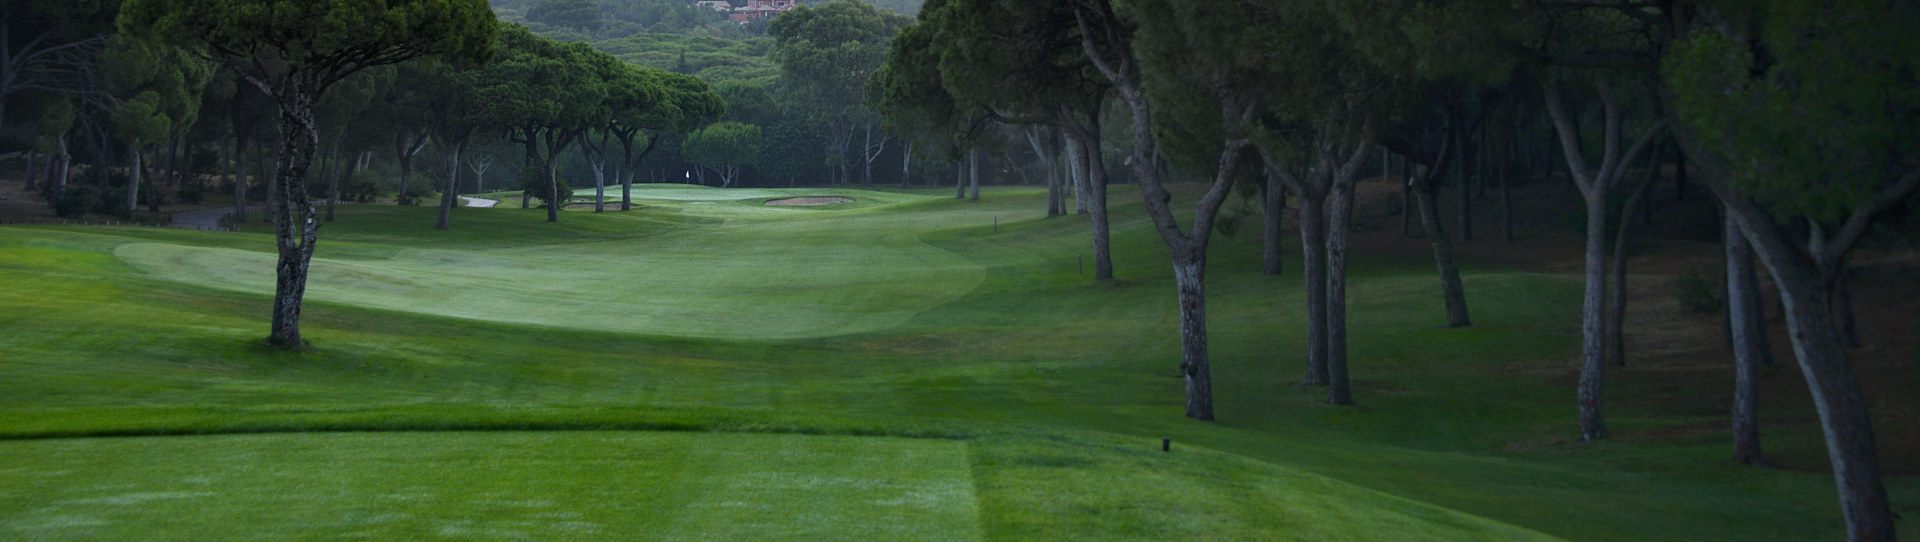 Portugal golf courses - Vilamoura Old Course - Photo 3